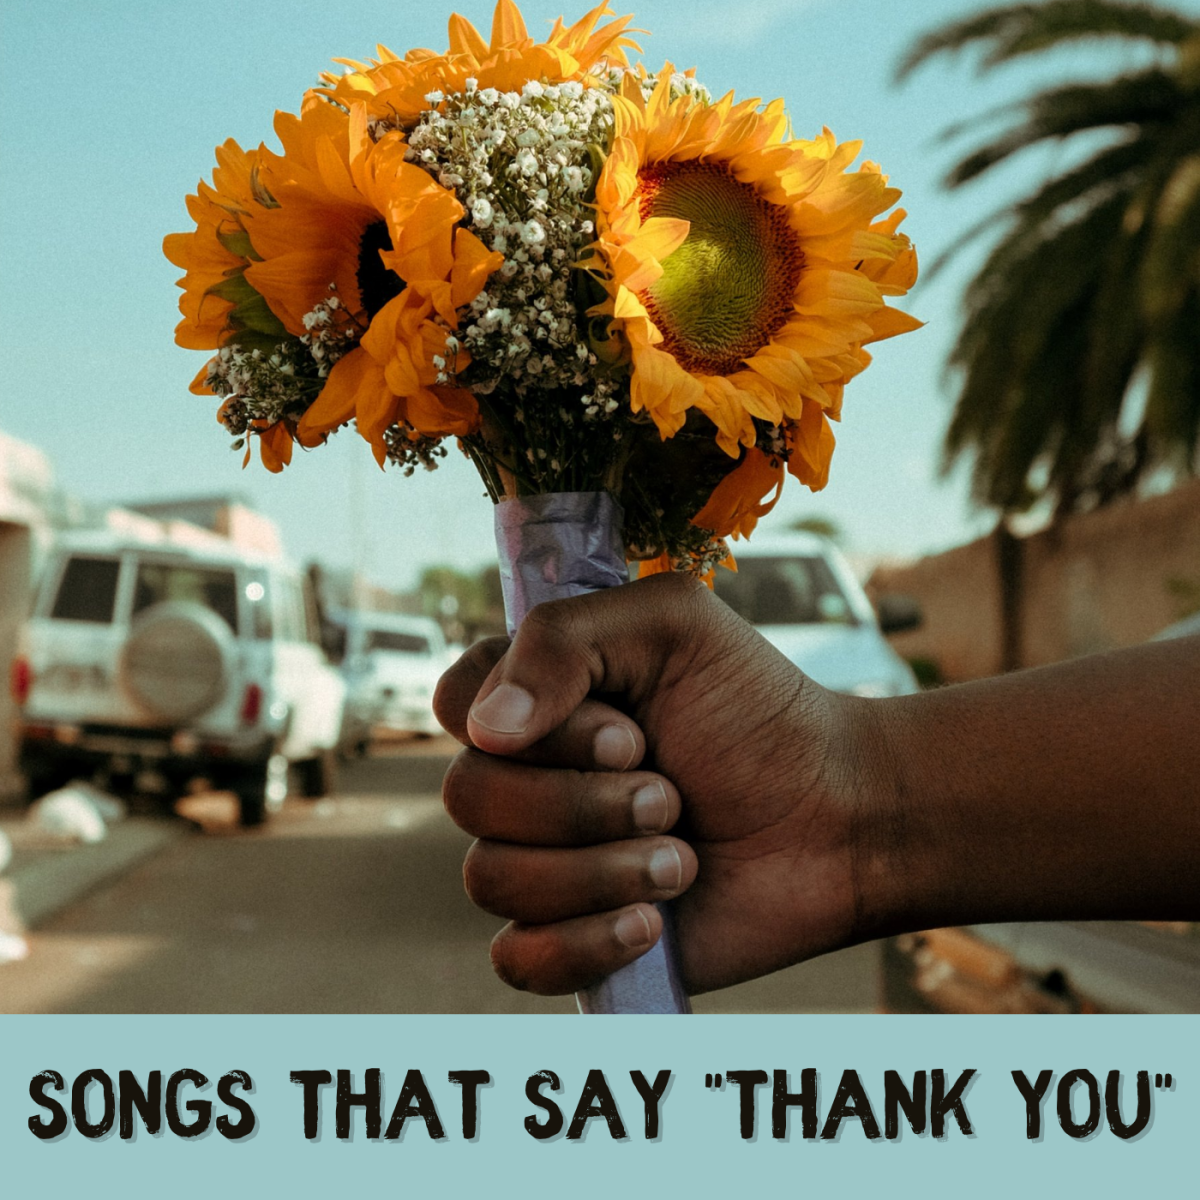 Be thankful for the blessings in your life. We have a list of pop, rock, country, and R&B songs to help you say "thank you." Develop a custom playlist for someone you love.